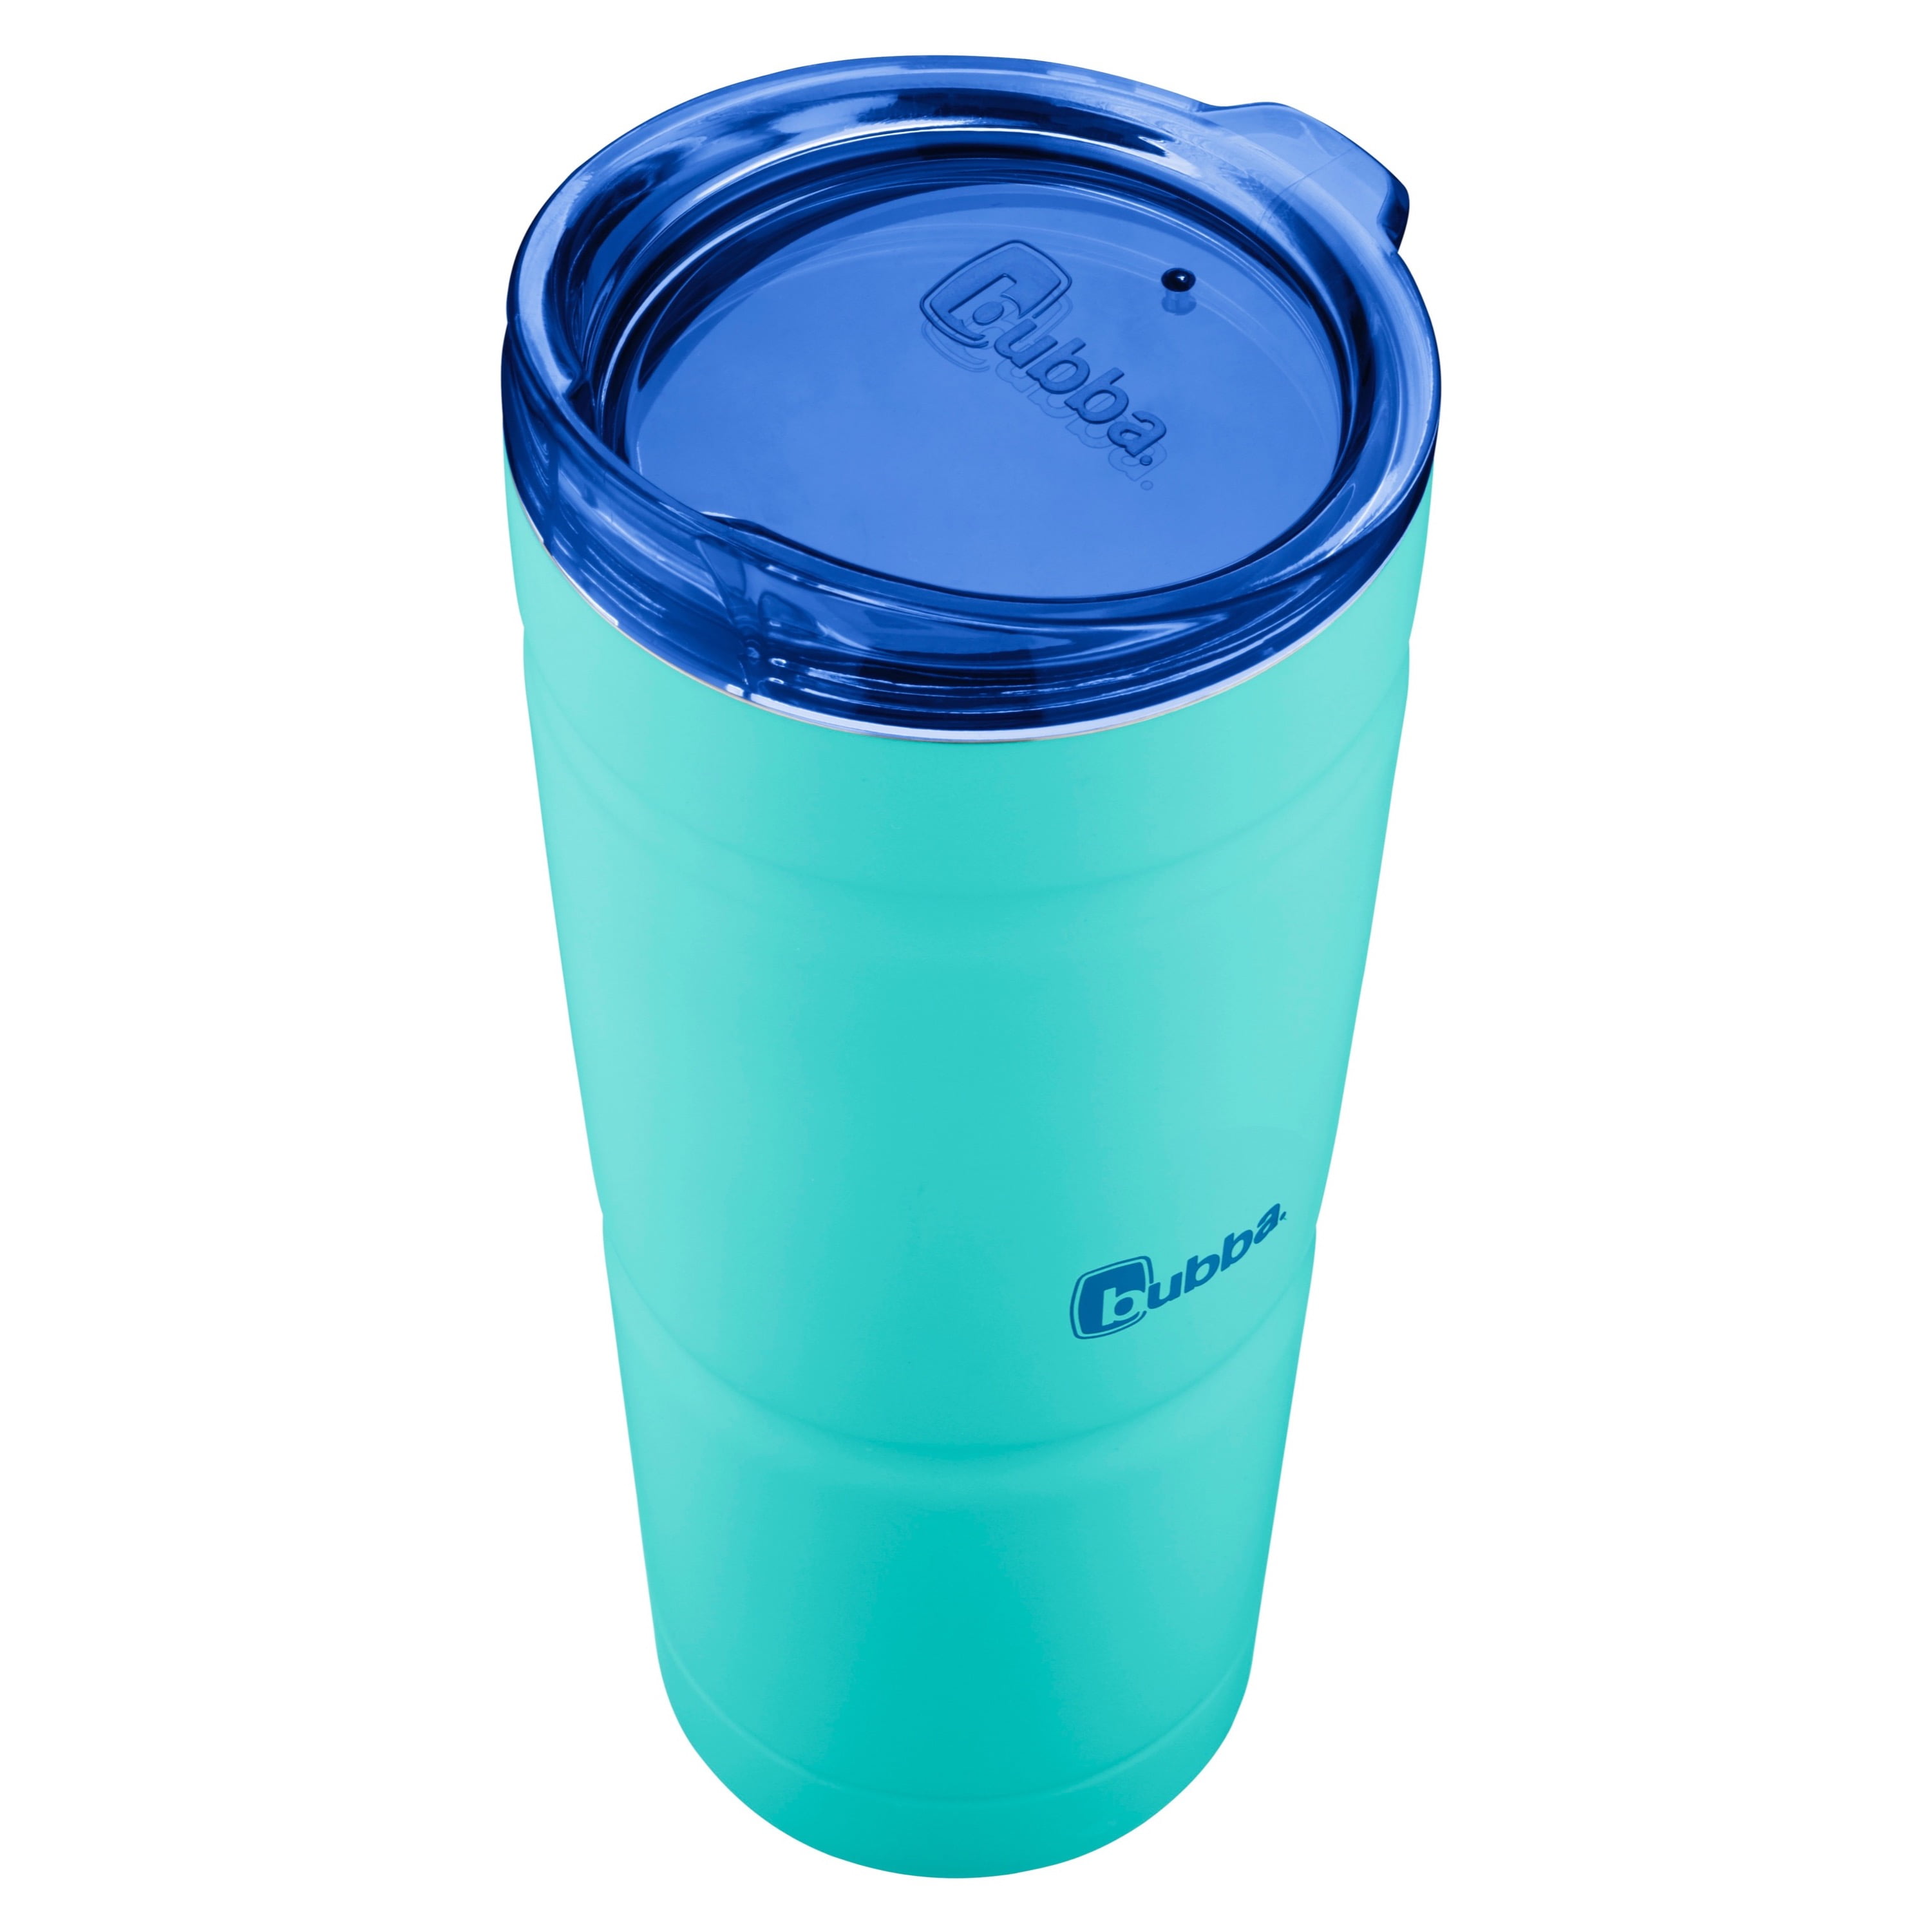 Personalized Tumbler Color LIGHT BLUE Custom Cup With Straw & Lid  Personalized Gift Matte Stainless Steel Bubba Brand 24 Fl Oz 